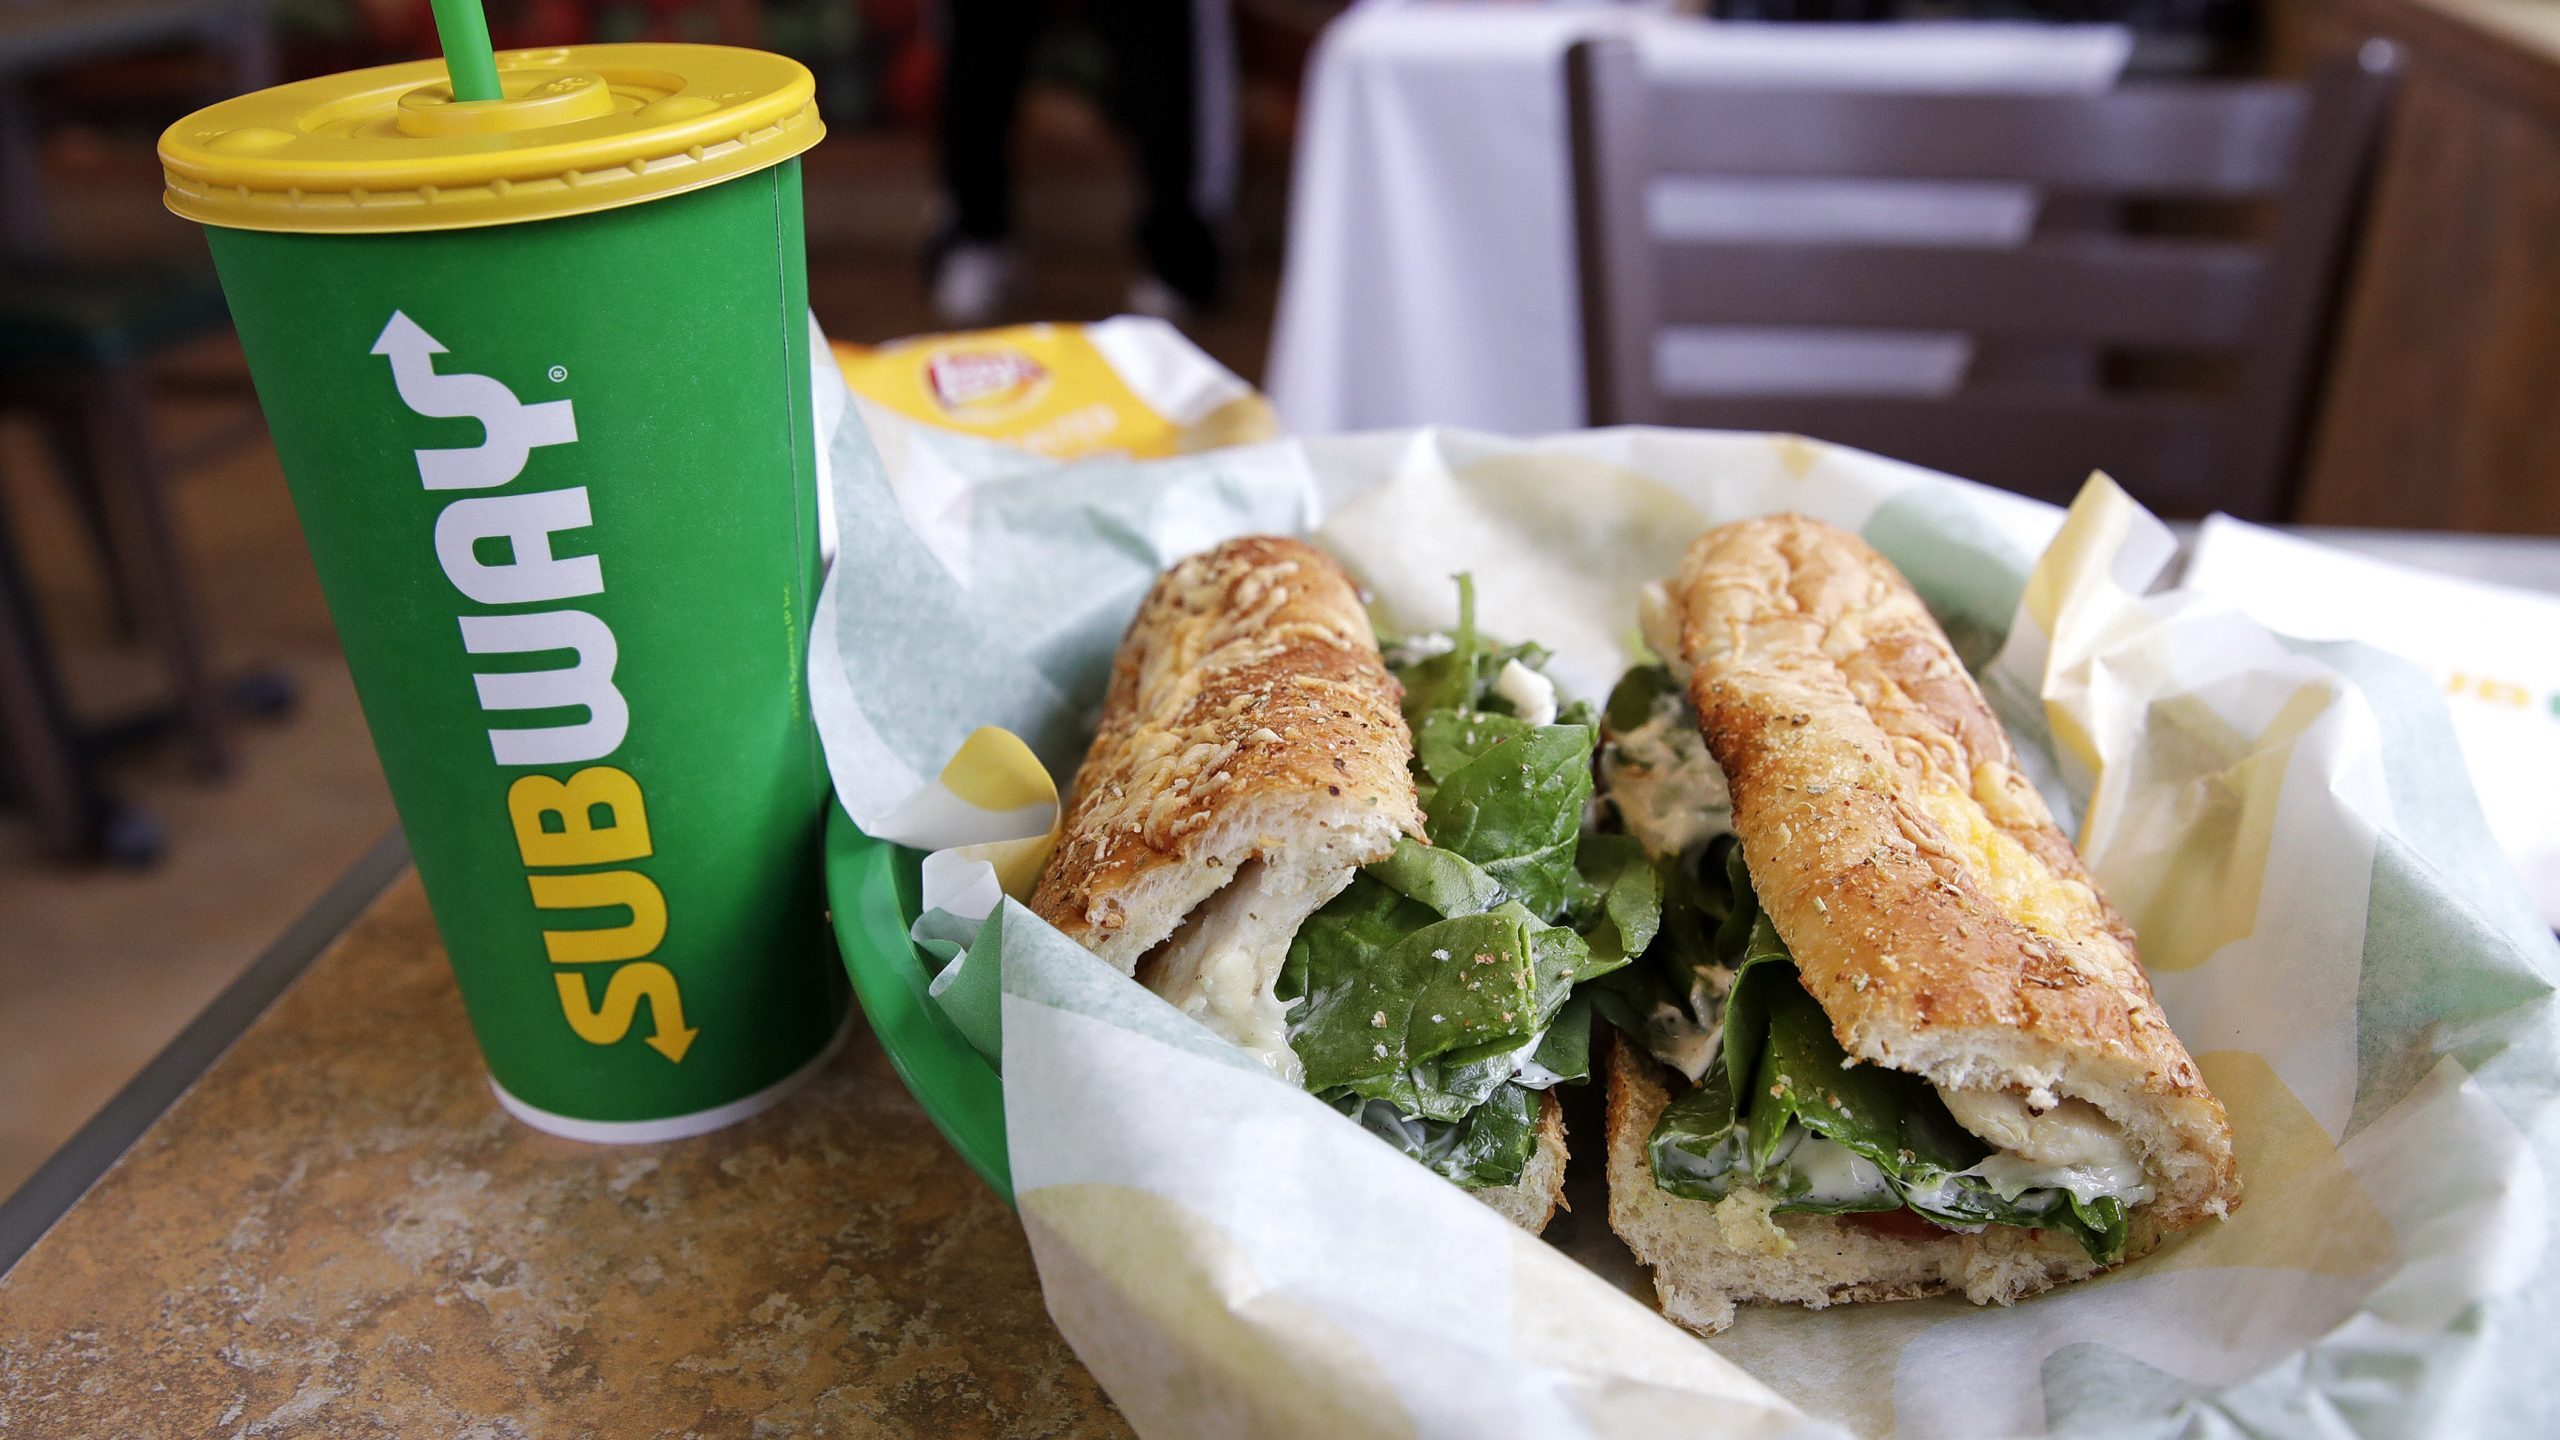 Subway sandwich and drink